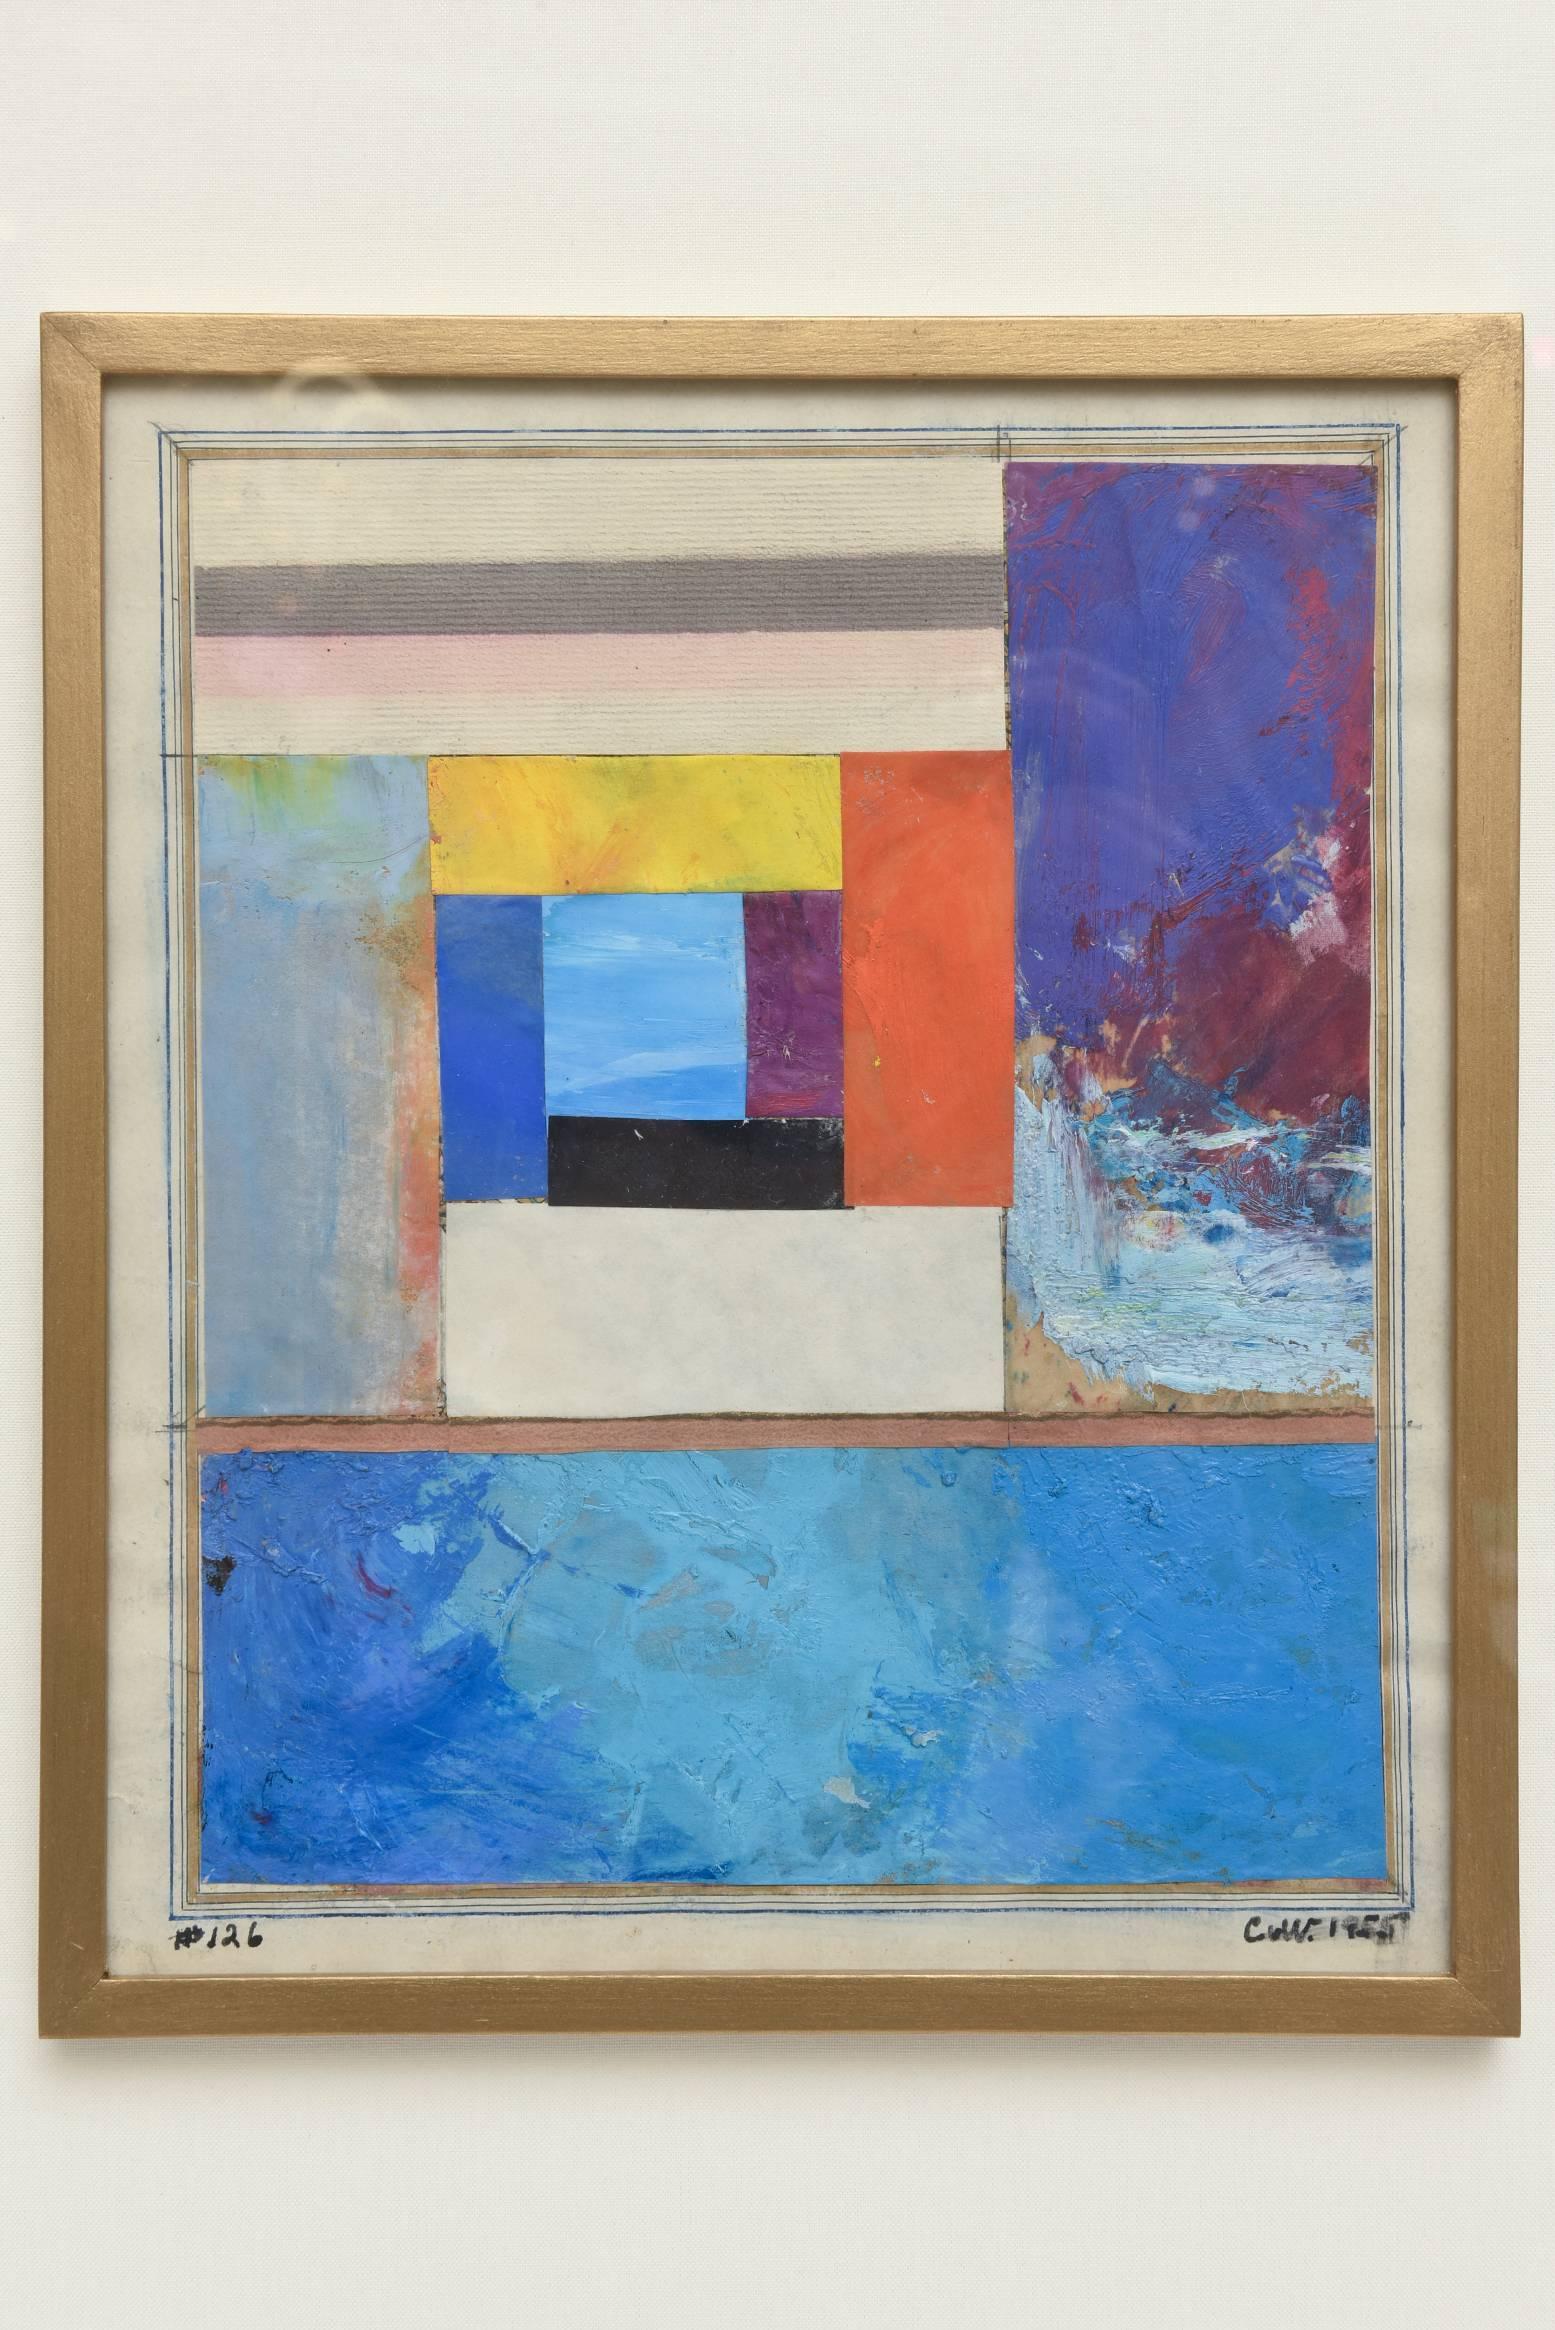 This amazing work of art frame that is a mixed media geometric abstract collage is by Charmion Von Weigand. It is signed with the artists initials CvWand and dated 1955.
This is a mid century work of art. It is a stunning piece of vibrancy. She was